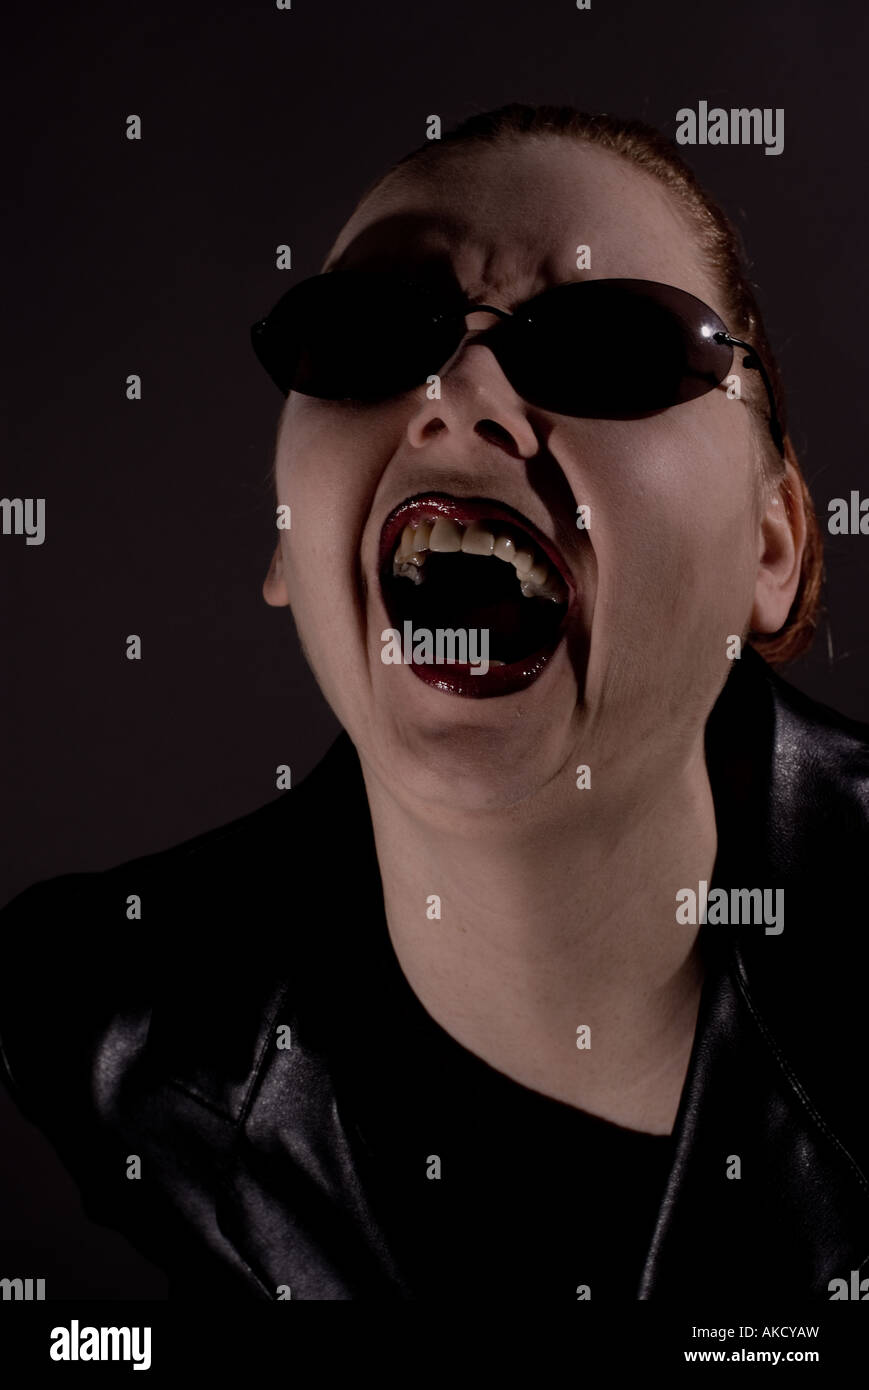 screaming woman with sunglasses Stock Photo